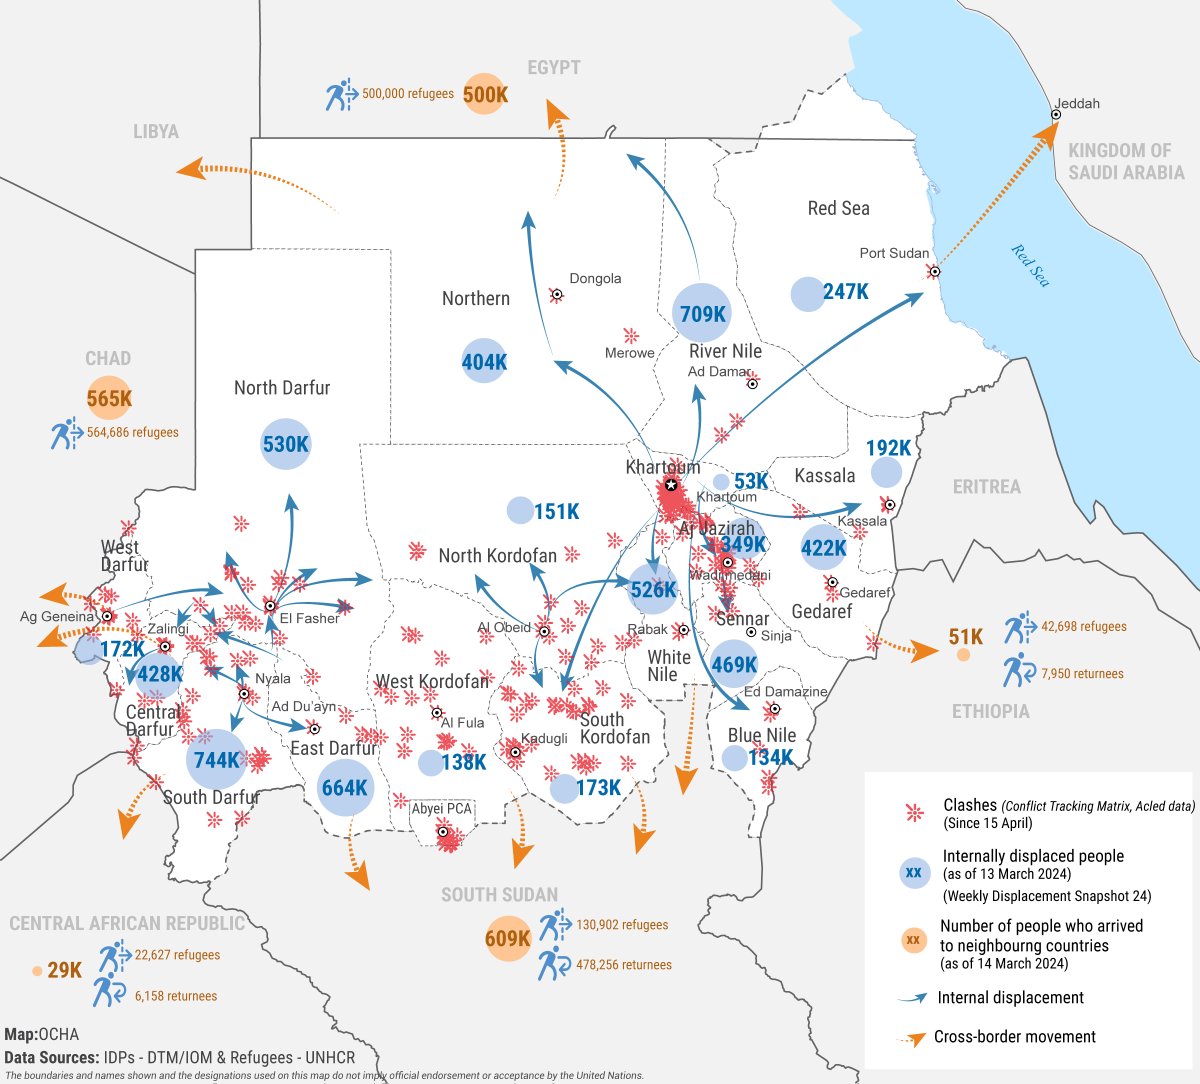 #Sudan updates - Catastrophe (IPC Phase 5) levels of food insecurity are expected in hard-to-reach areas per @FEWSNET -Without urgent aid Sudan faces a crisis where nearly 230K children and new mothers could perish from hunger per @save_children 🔗rb.gy/be2uha